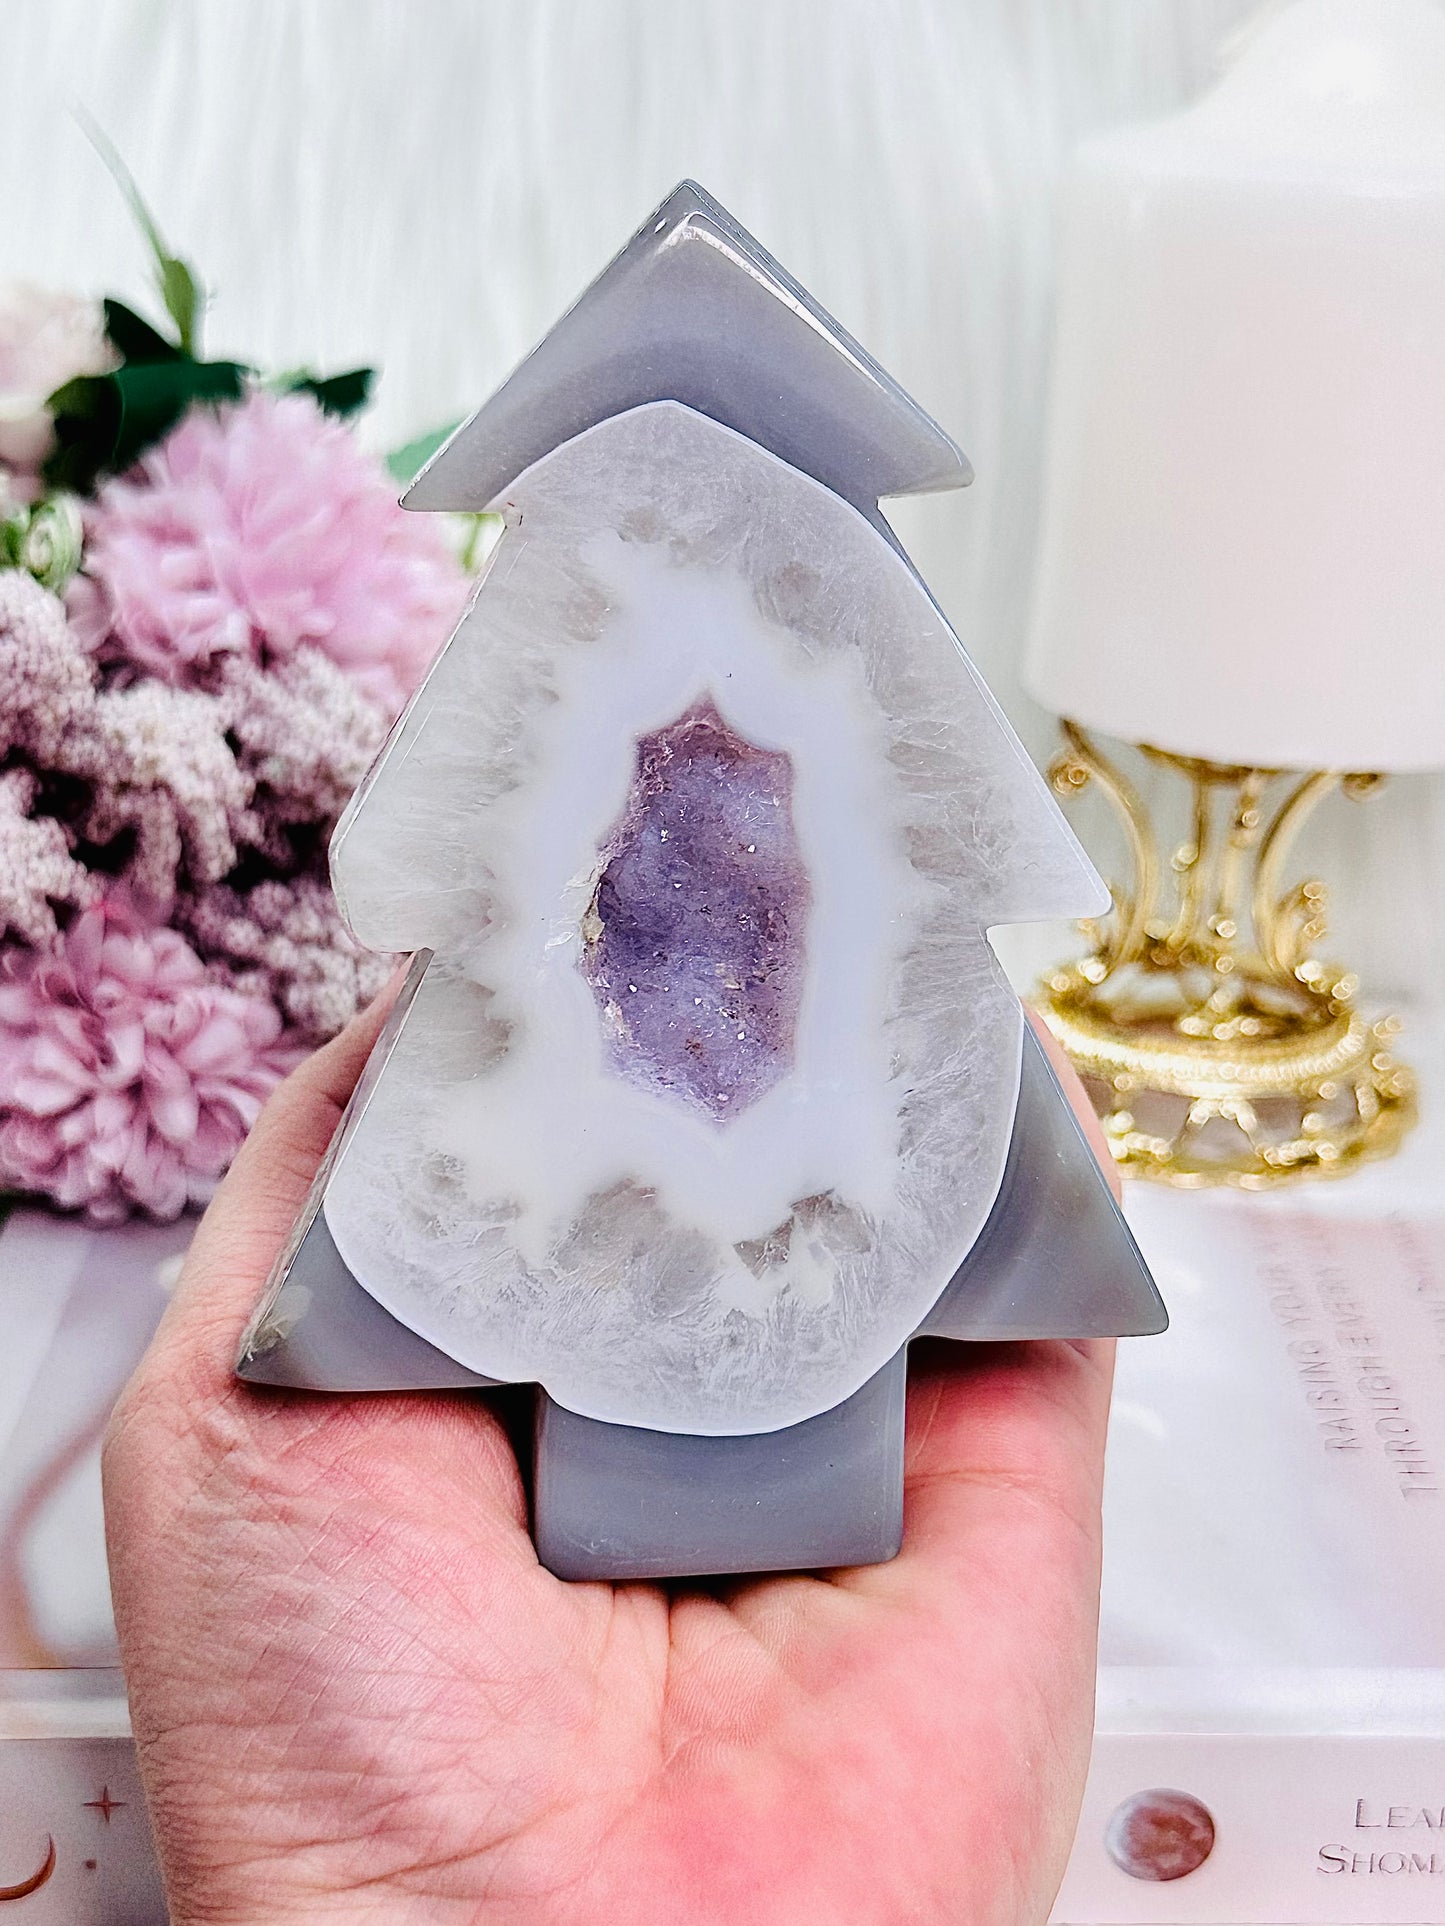 For The Most Wonderful Time Of Year ~ Stunning Druzy Agate Amethyst Carved Christmas Tree From Brazil 12cm